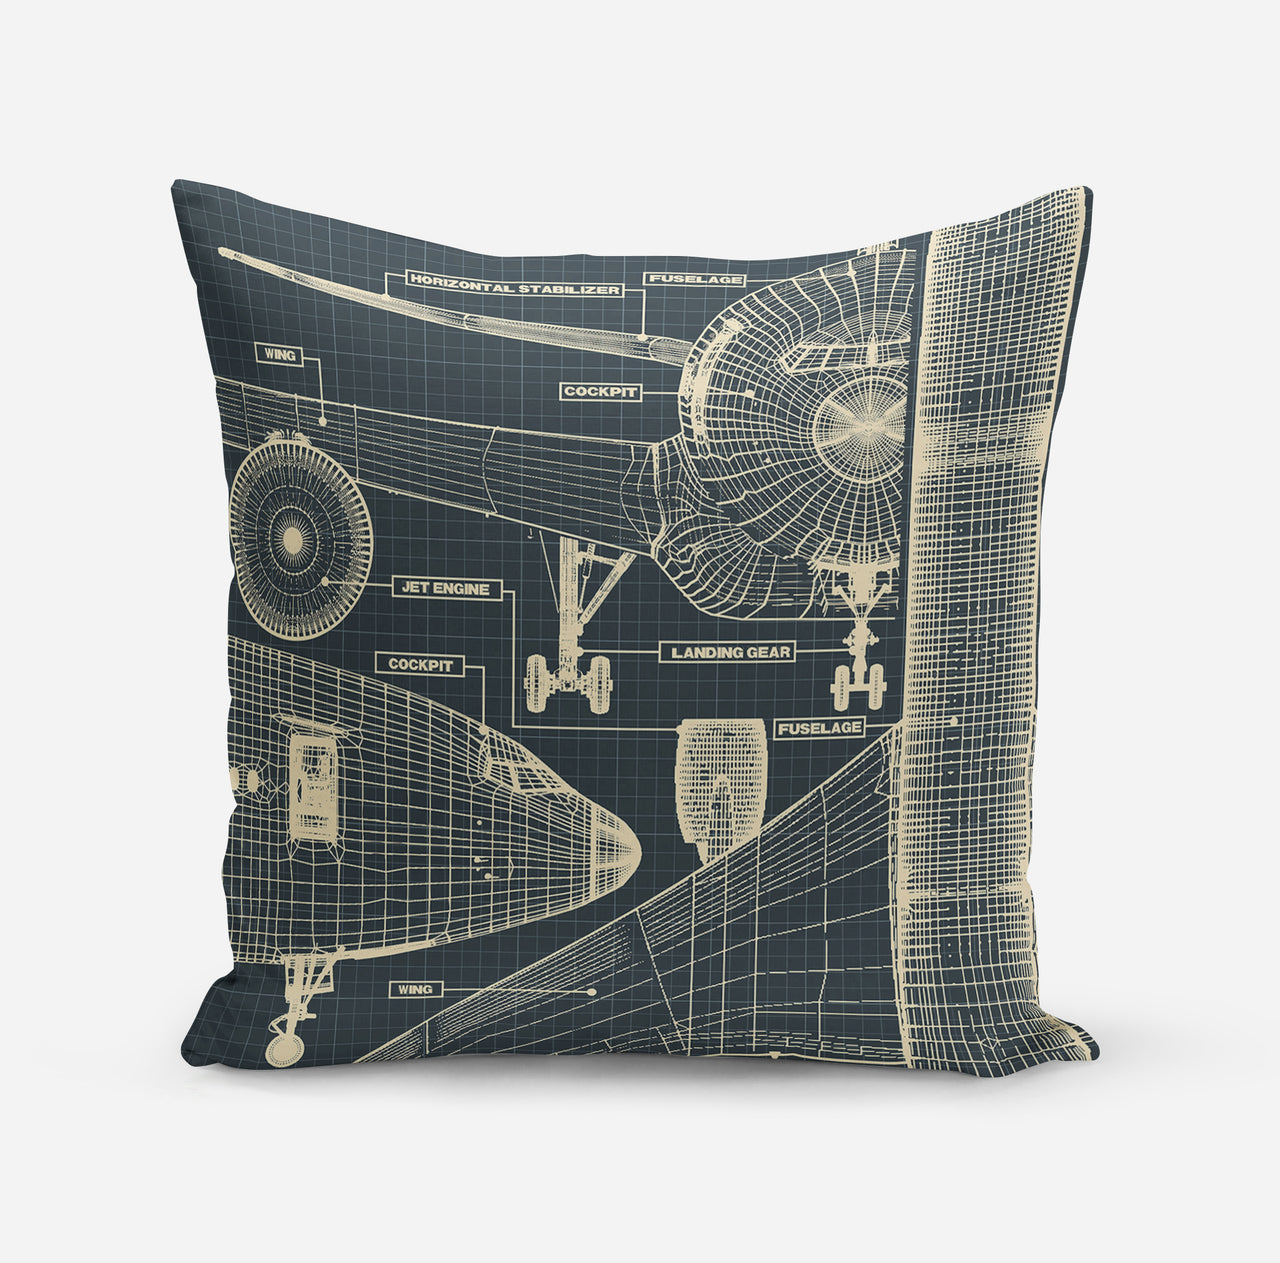 Airplanes Fuselage & Details Designed Pillows